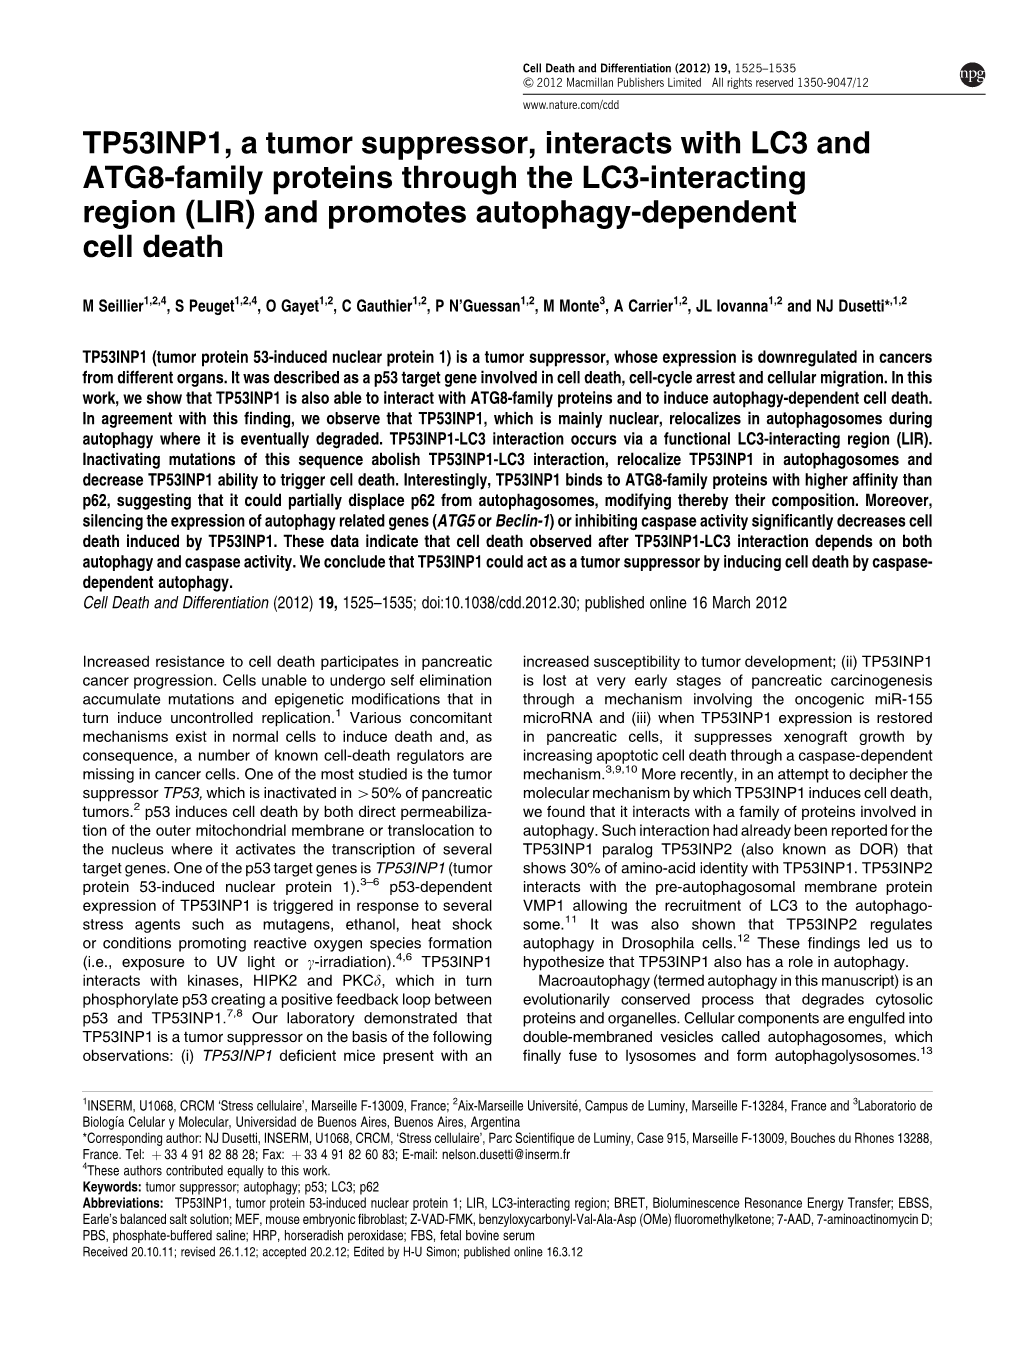 TP53INP1, a Tumor Suppressor, Interacts with LC3 and ATG8-Family Proteins Through the LC3-Interacting Region (LIR) and Promotes Autophagy-Dependent Cell Death